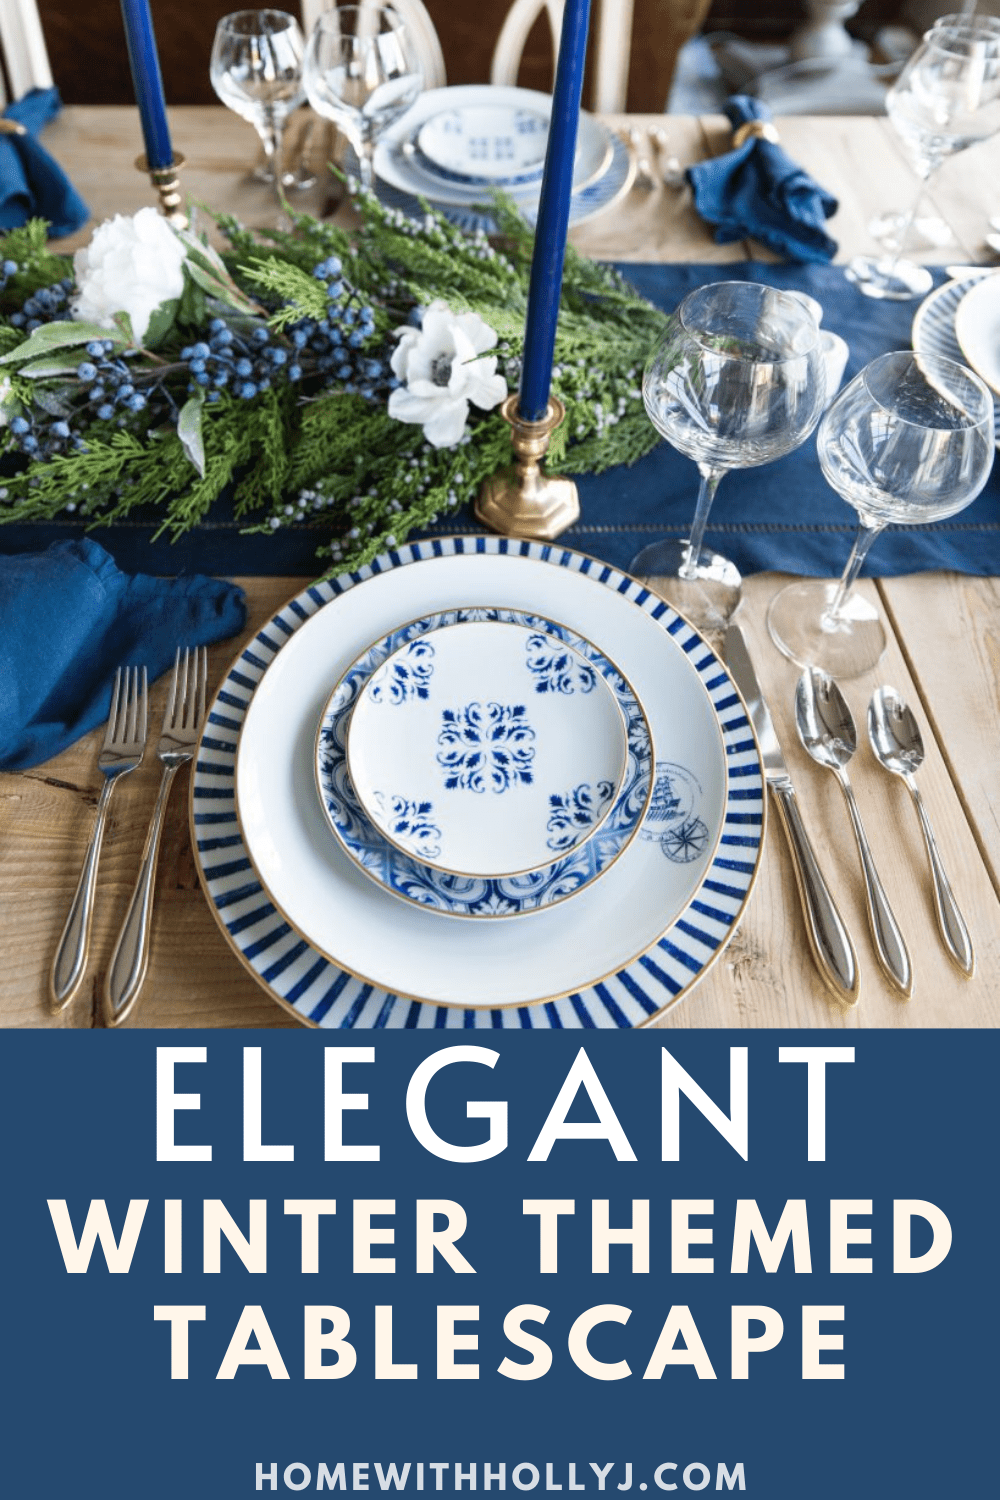 Sharing a beautiful winter themed table setting featuring blue and white colors, plates, napkins, and candlesticks